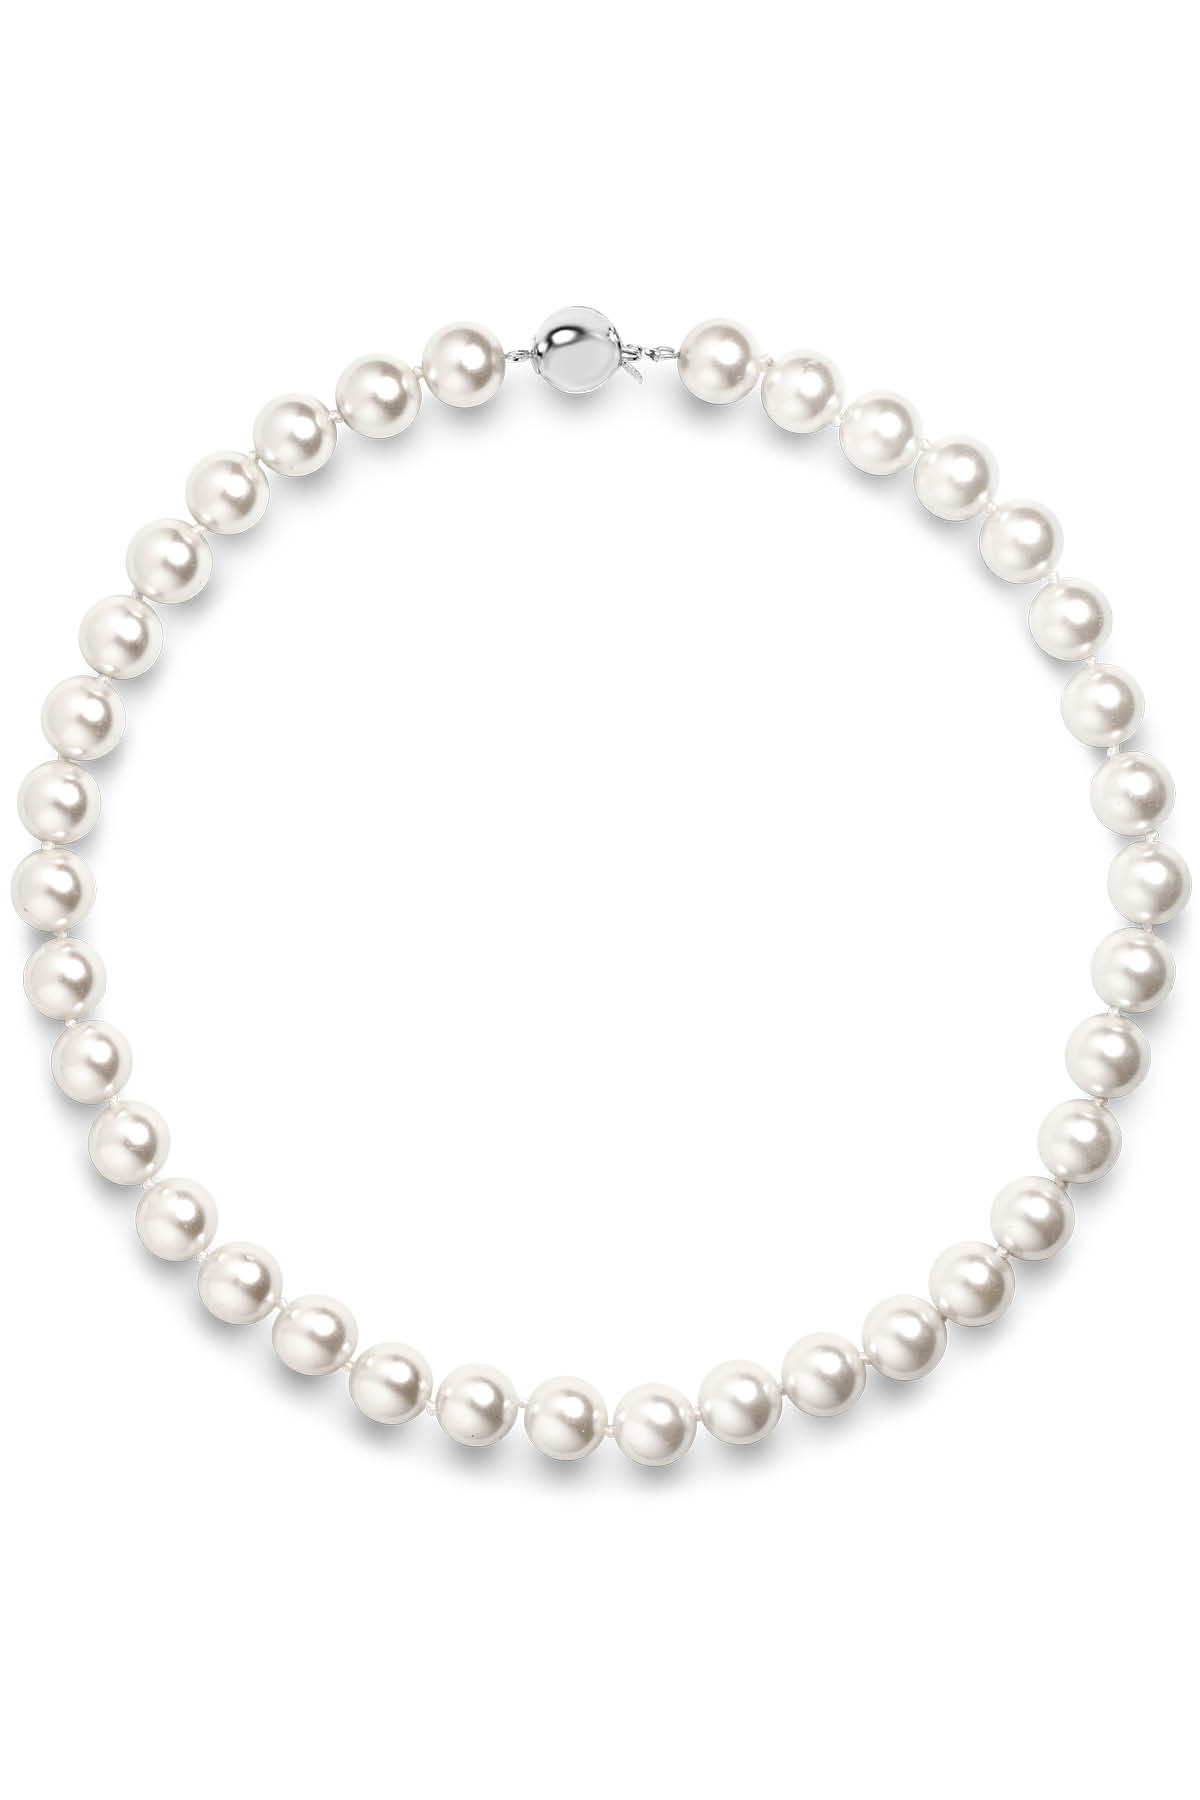 KEZEF Faux Pearl Necklace Cream White Simulated Pearls Necklace for Women 16" - Pearl Necklace for Men - Pearl Size: 10mm Pearls - image 1 of 7